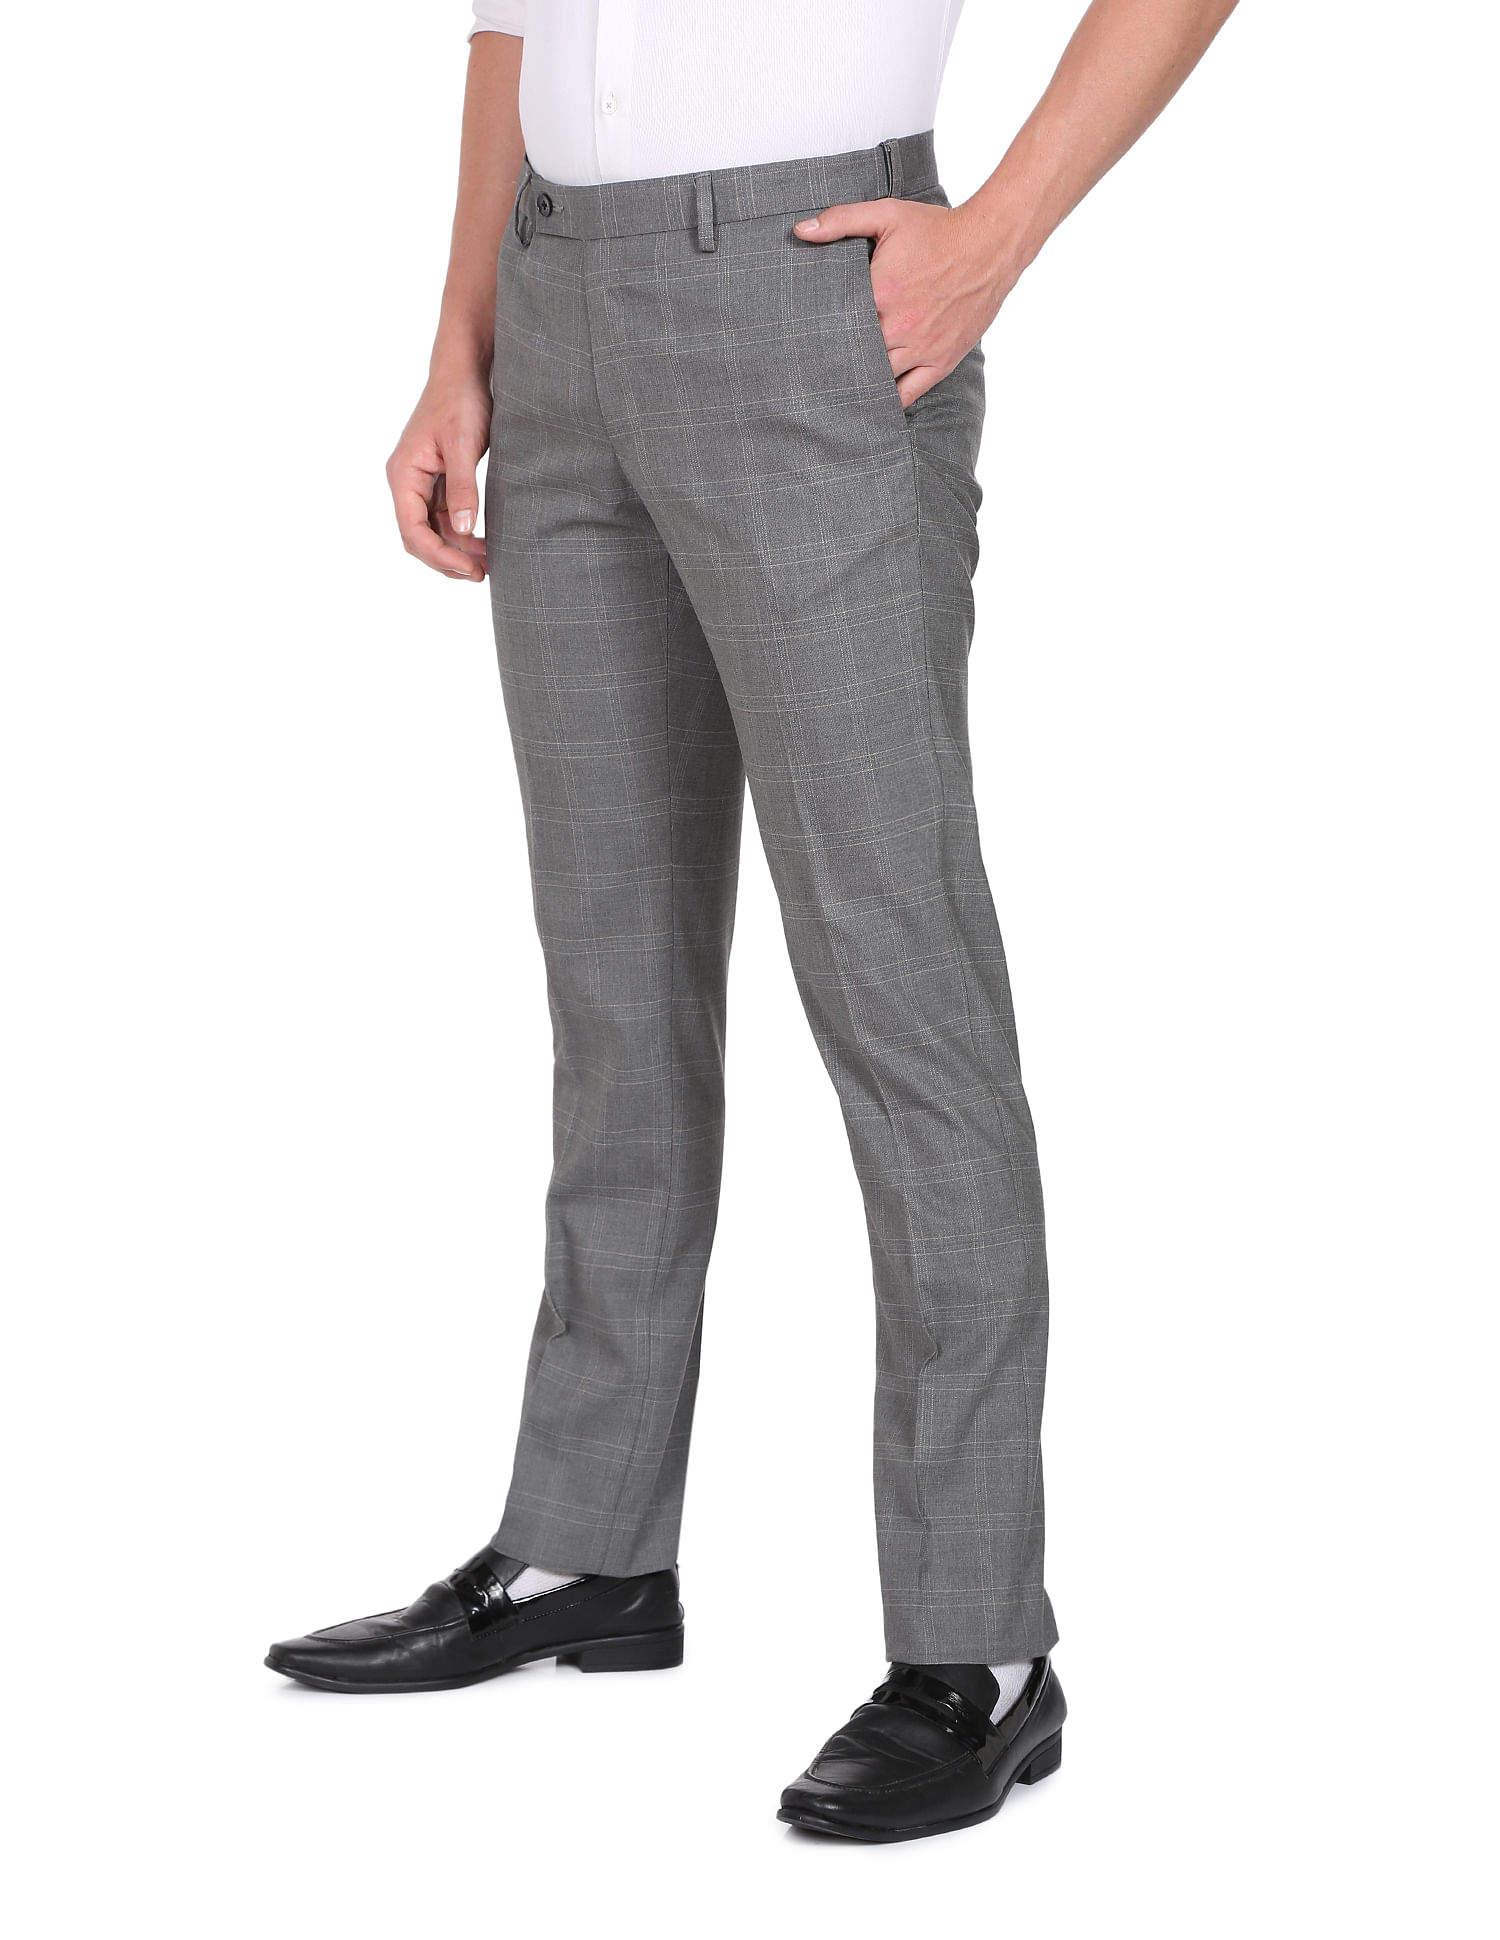 Olive Green Classy Look Comfortable Flat Front MenS Casual Pant For Party  Wear at Best Price in New Delhi  Simran Garments